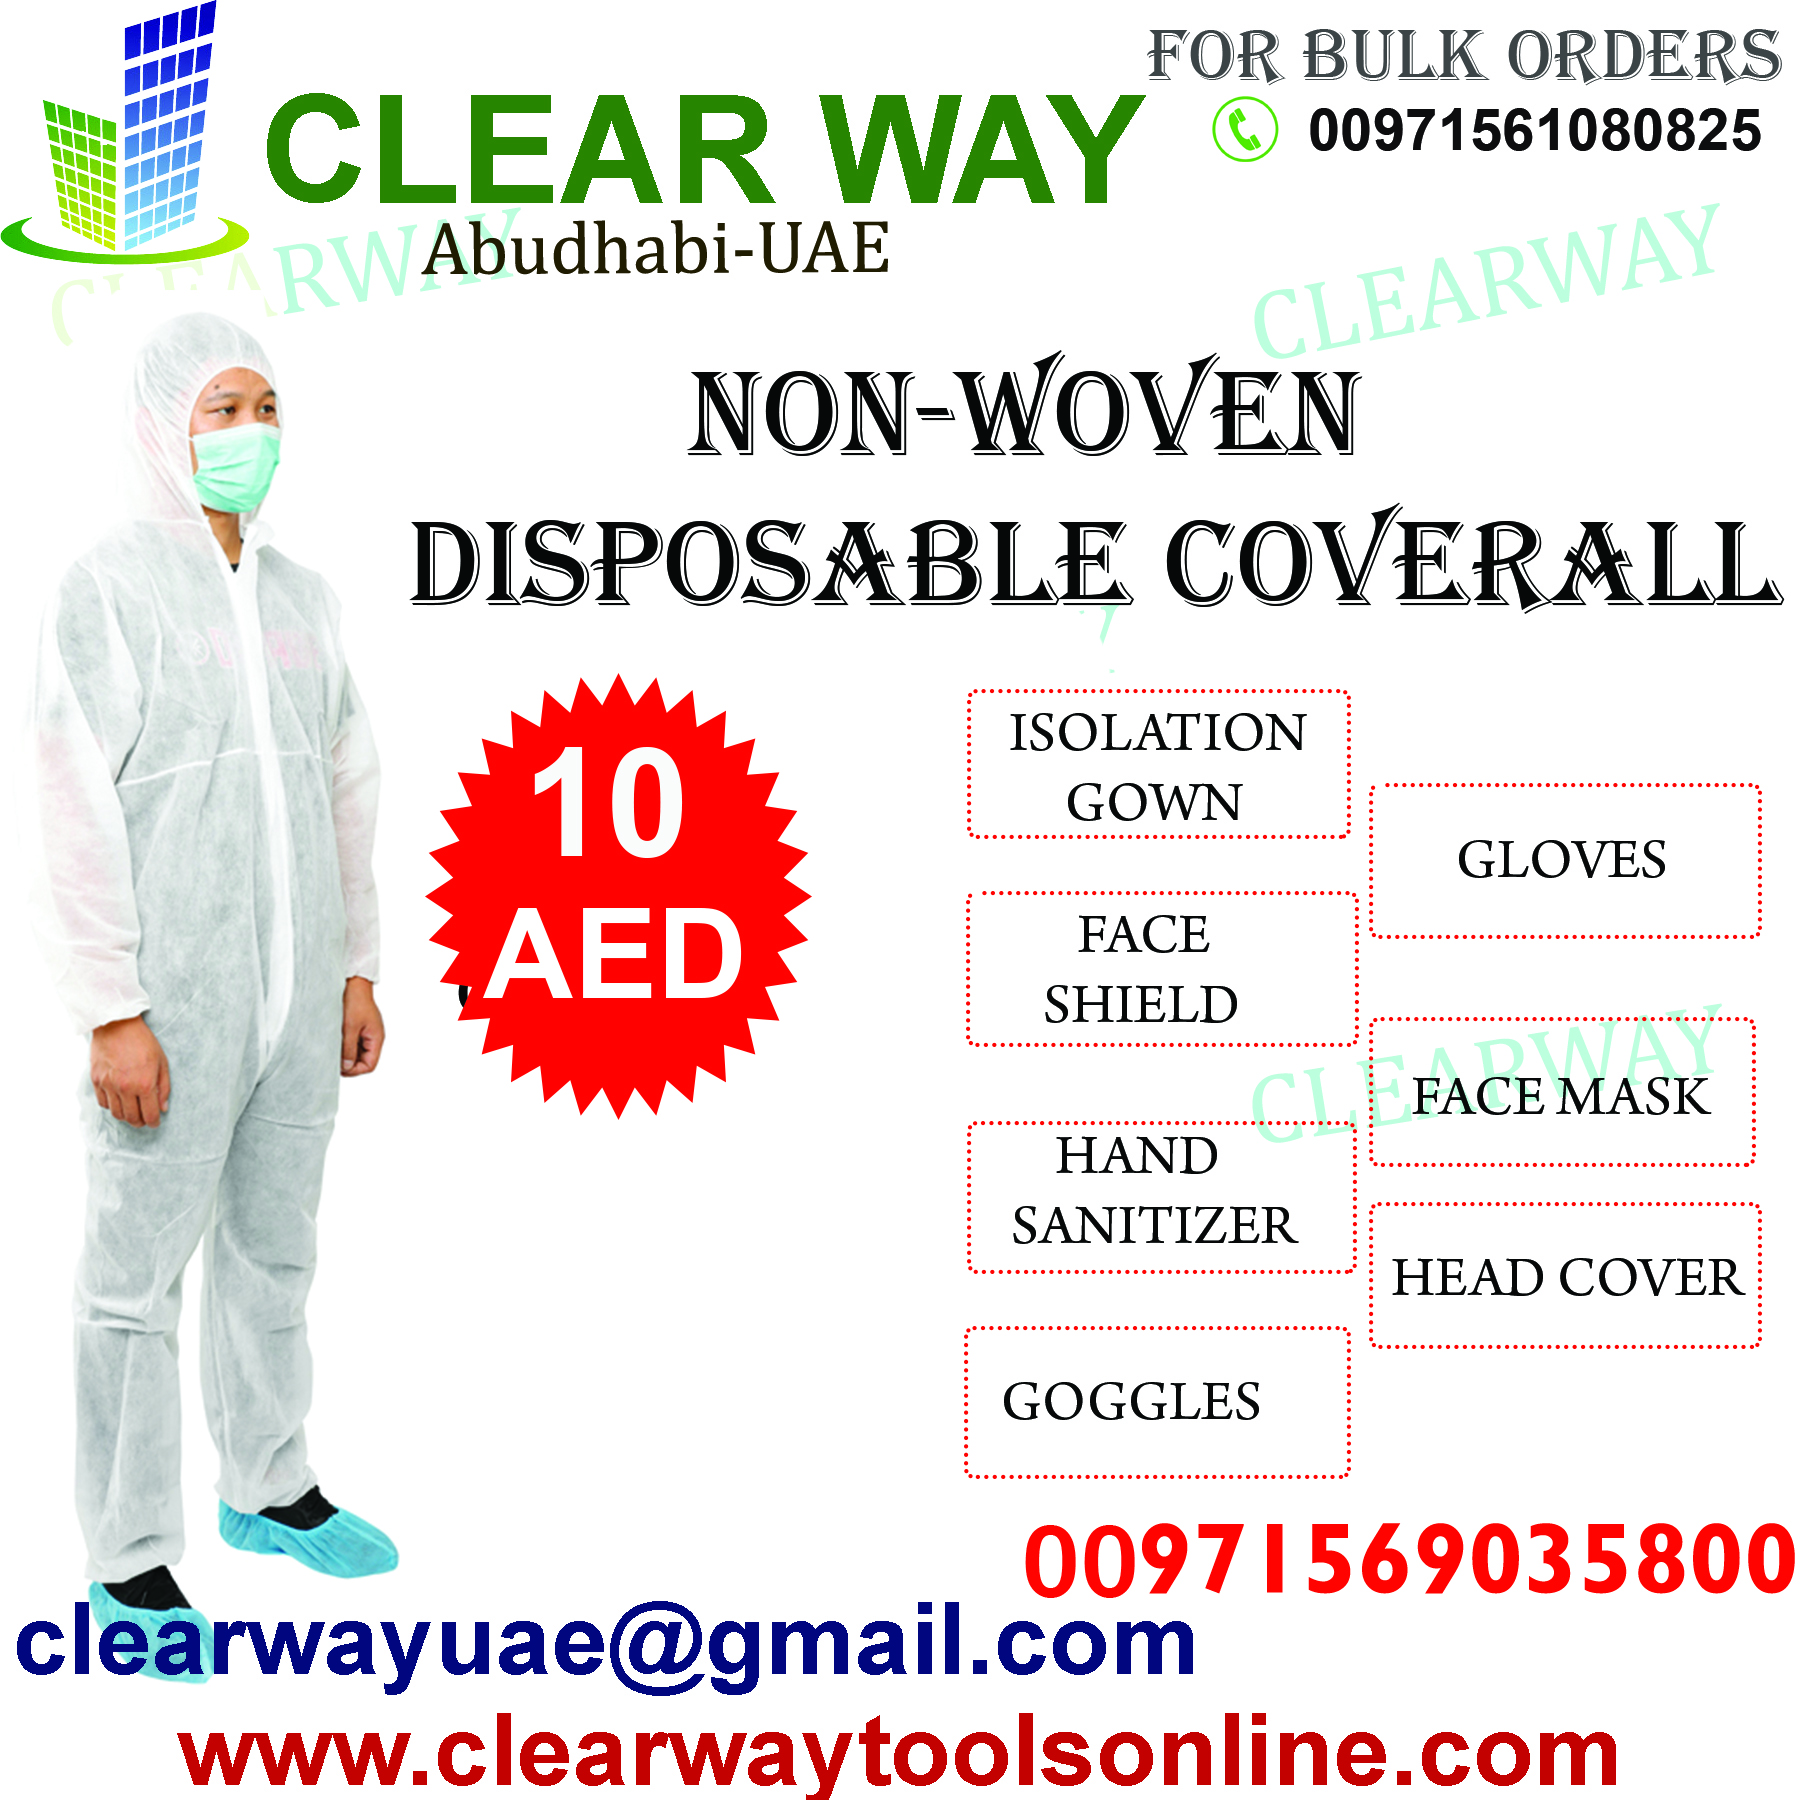 NON-WOVEN DISPOSABLE COVERALL DEALER IN MUSSAFAH , ABUDHABI , UAE BY CLEARWAY